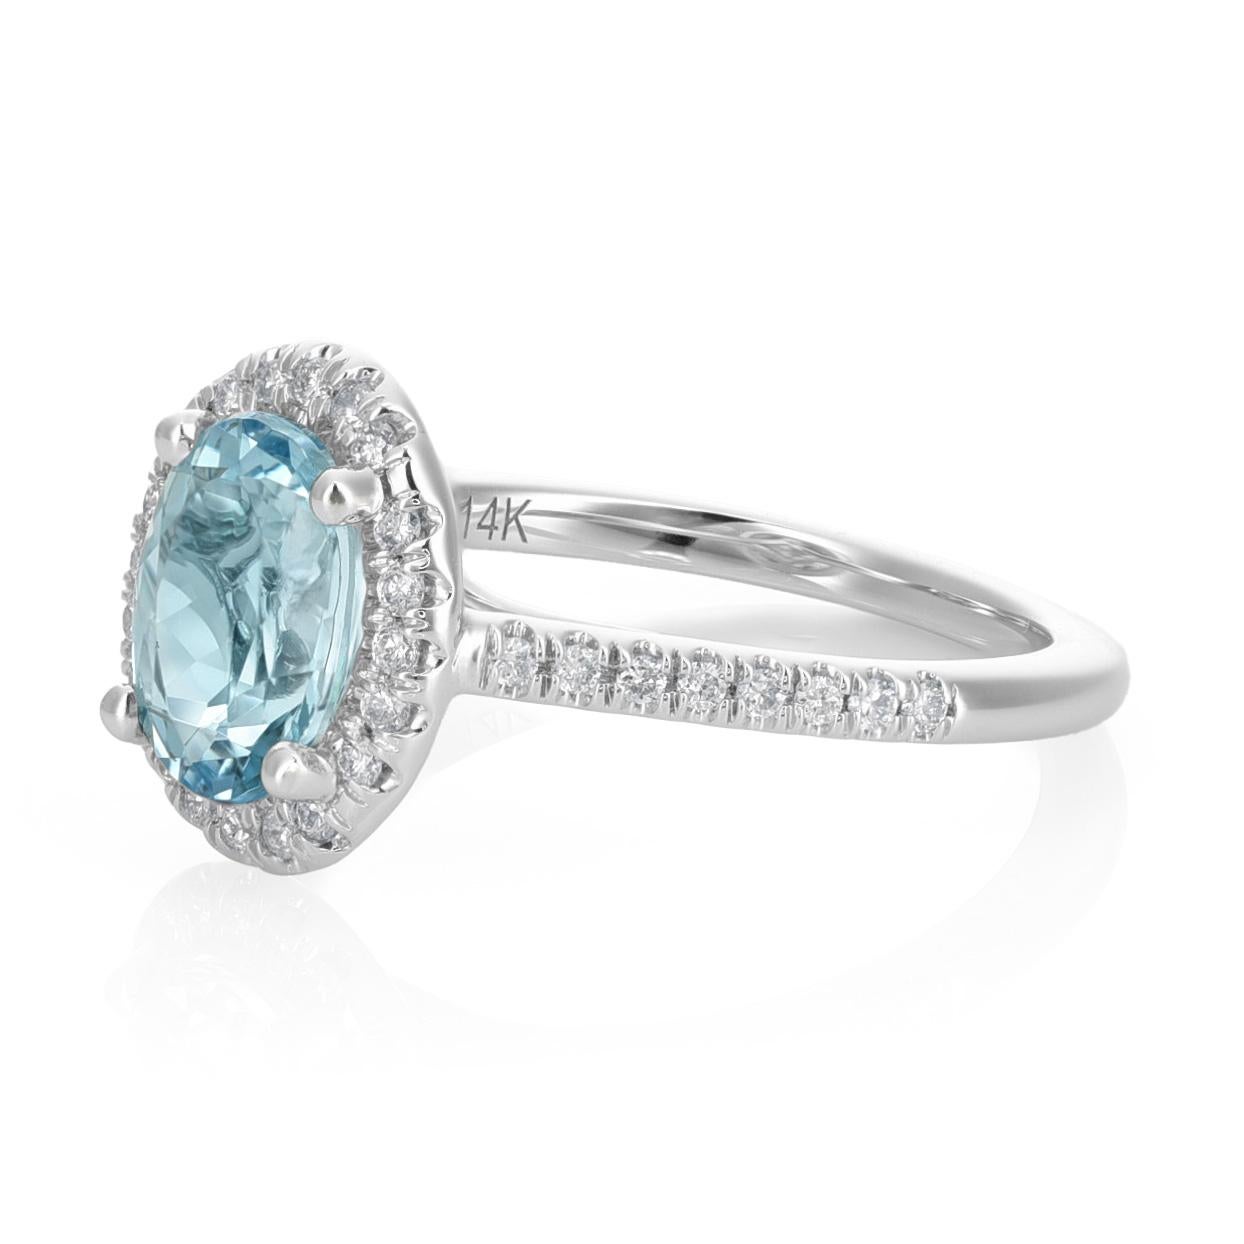 Adorn yourself in elegance with this 14K White Gold Ring showcasing a 1.56 carats Natural Aquamarine in a graceful oval shape. The tranquil blue hue of the Aquamarine is enhanced through a heating process, enriching its allure. Encircling the